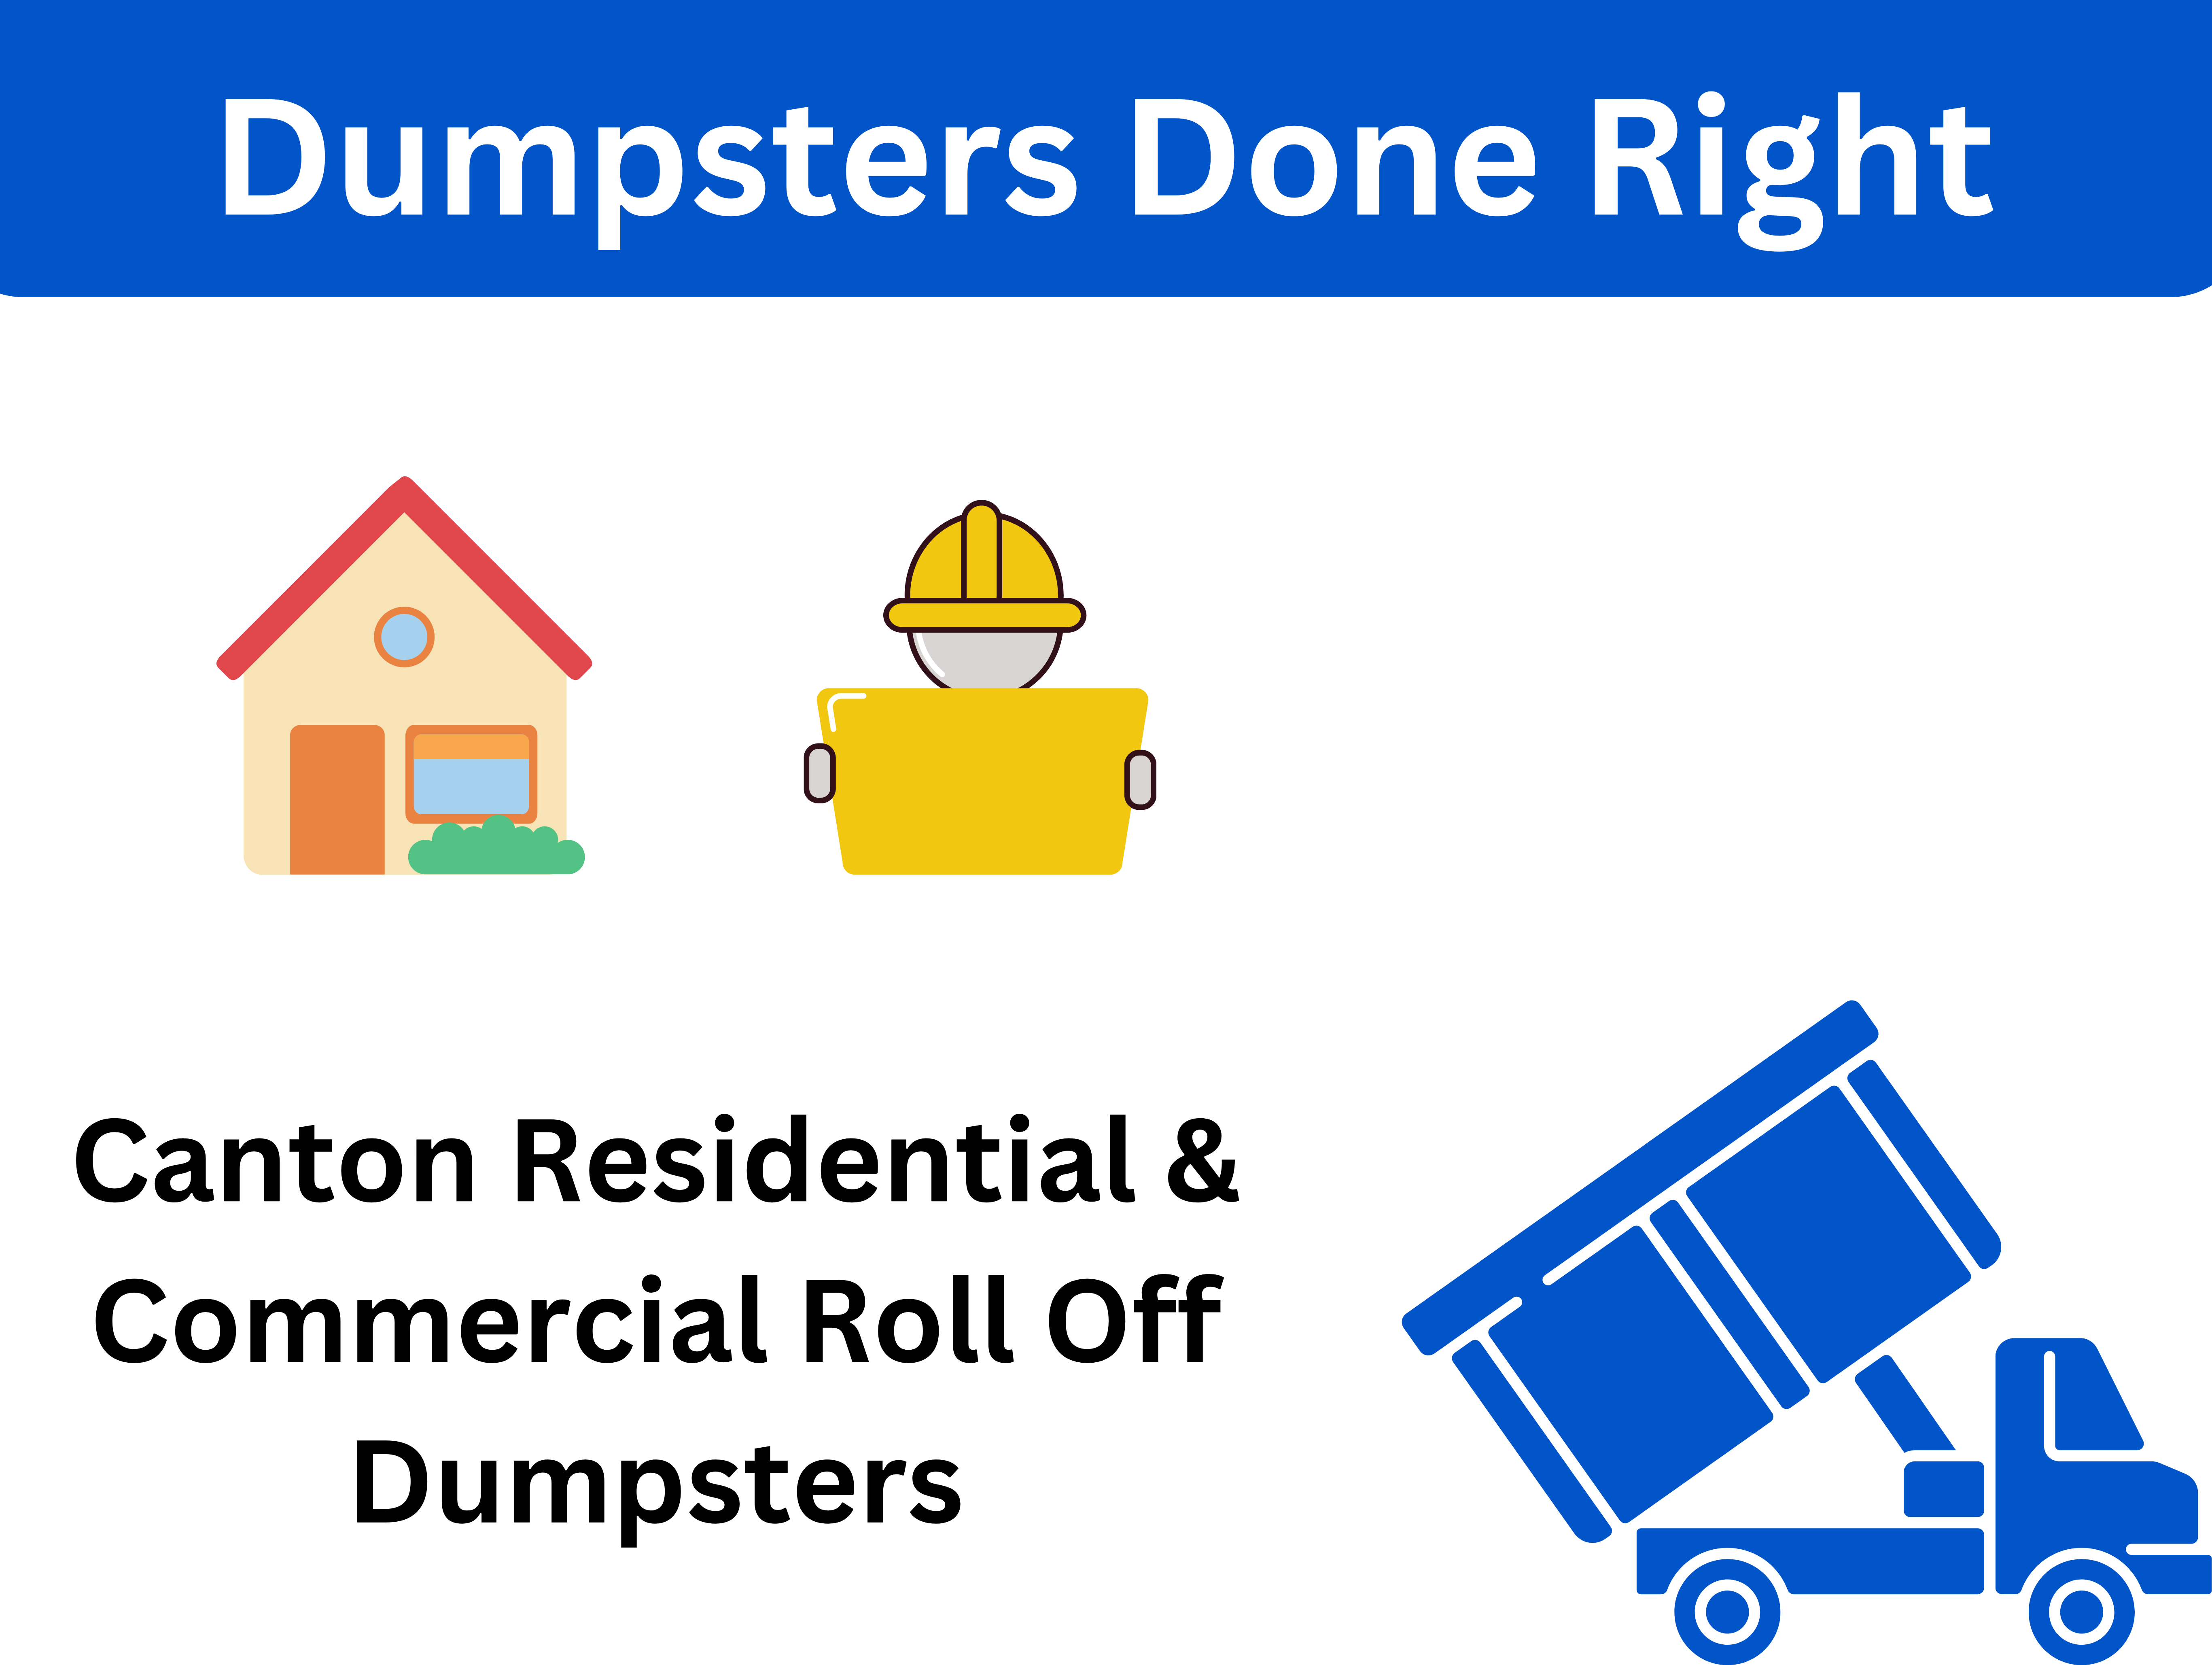 Canton Residential & Commercial Roll Off Dumpsters by King Dumpsters